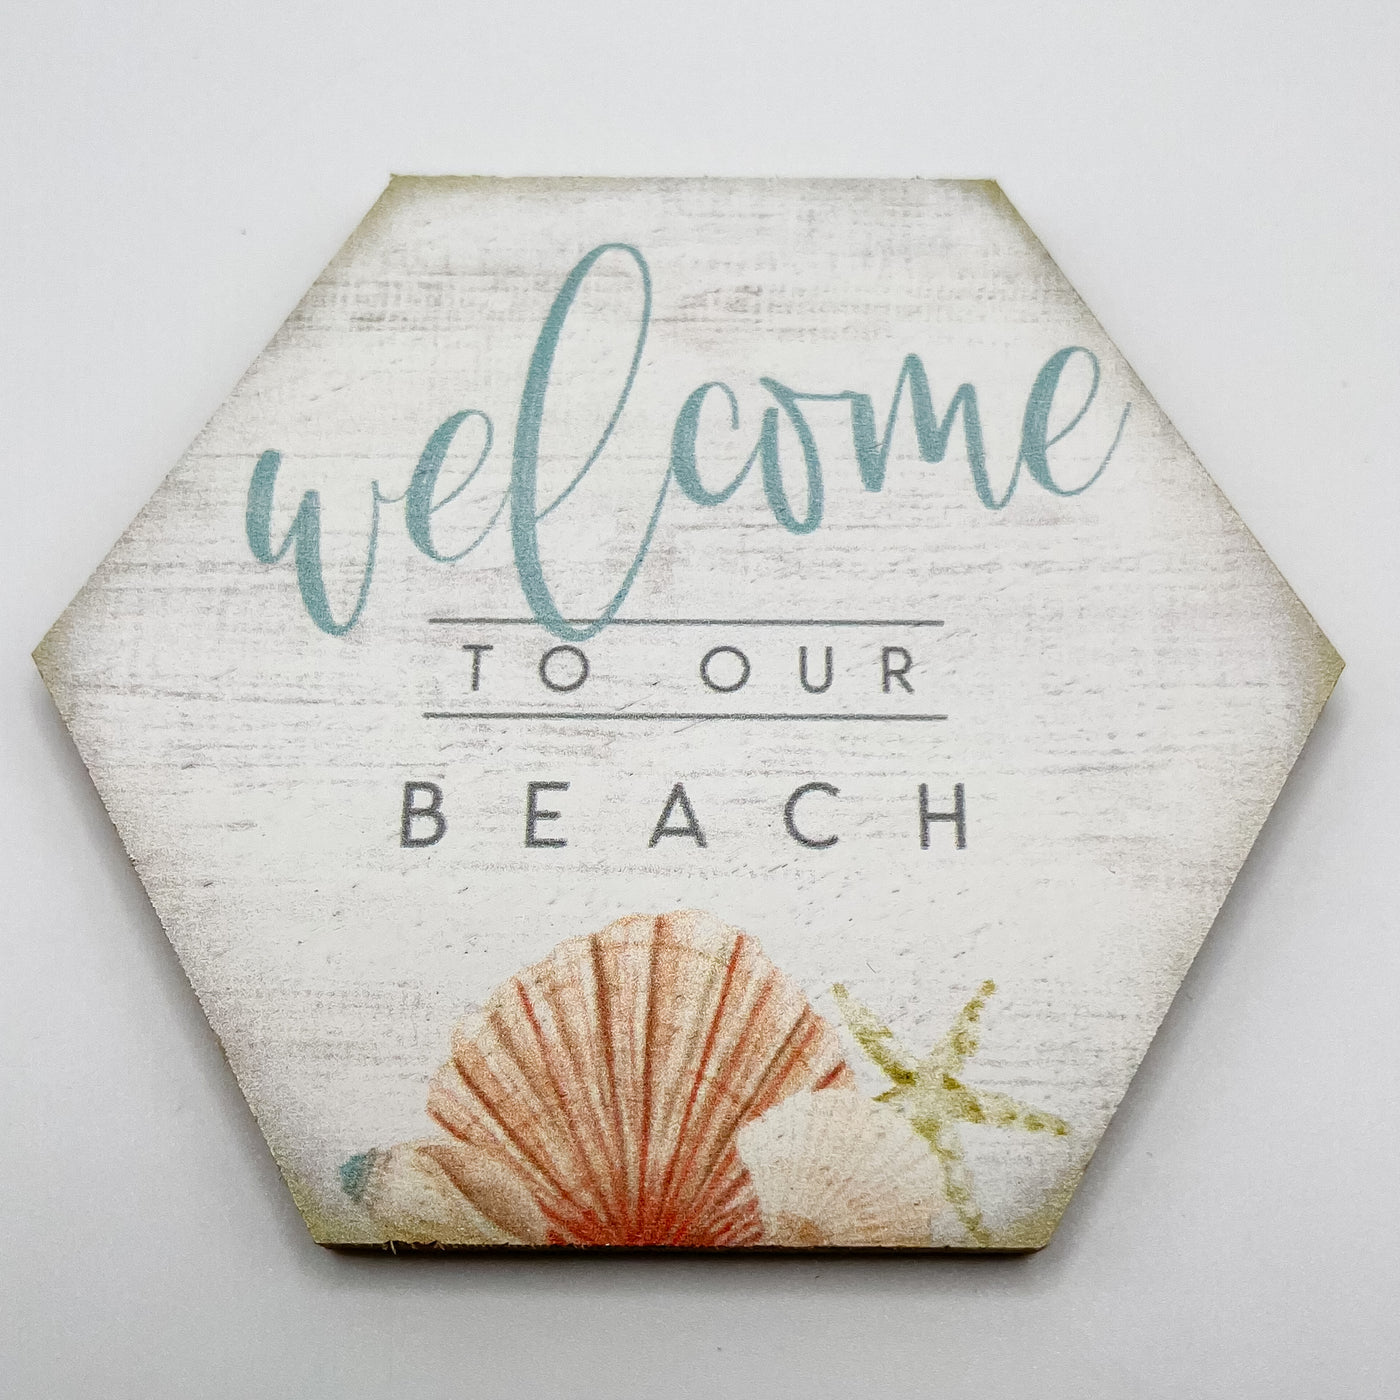 "Welcome To Our Beach" Coaster Magnet